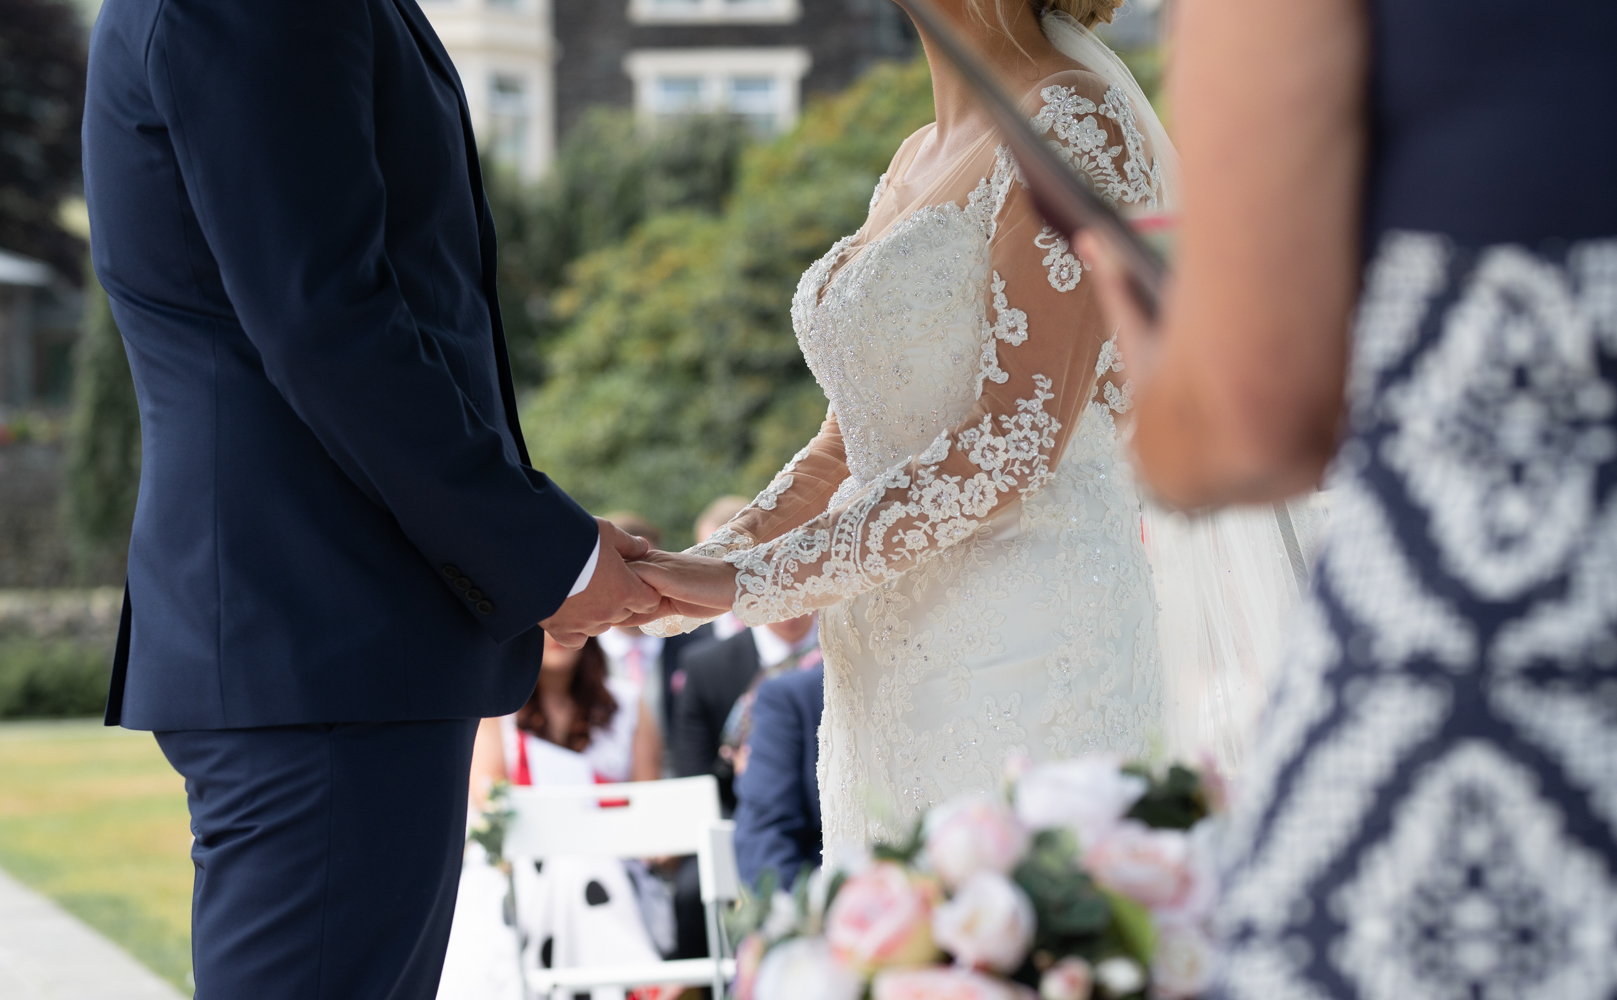 The bride and groom holding hands during the wedding ceremony